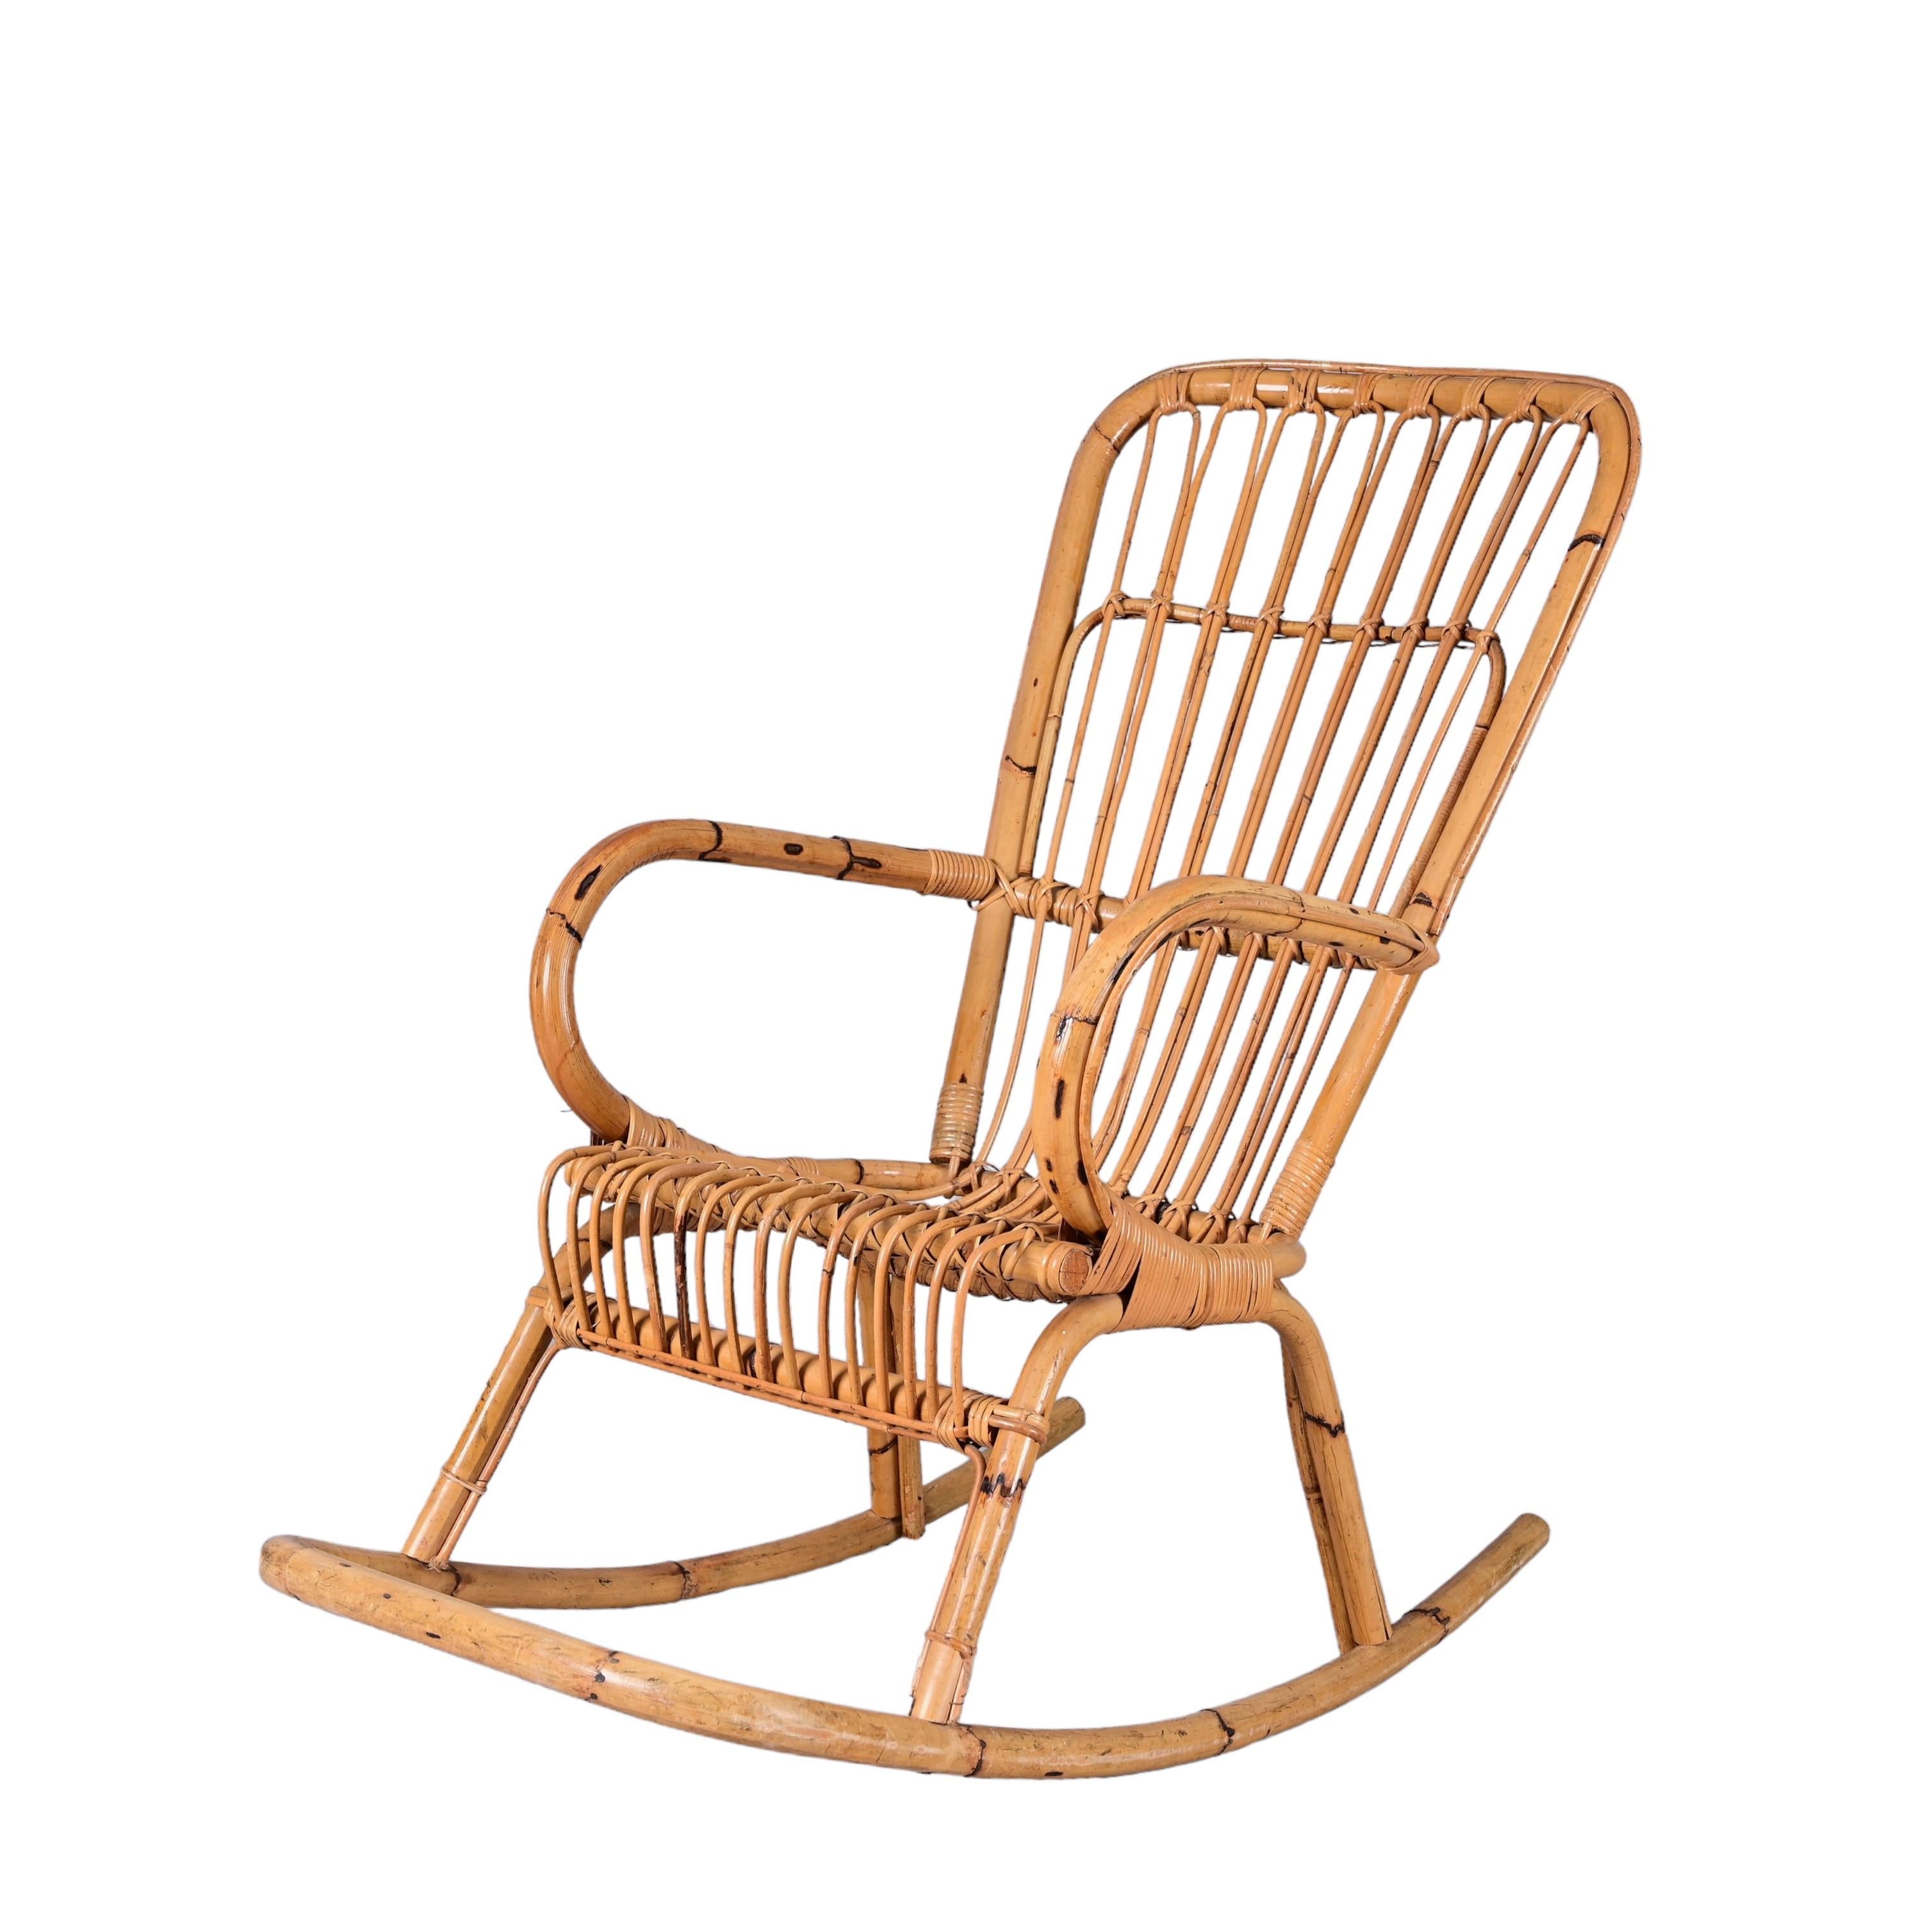 20th Century Mid-Century French Riviera Curved Rattan and Bamboo Italian Rocking Chair, 1970s For Sale